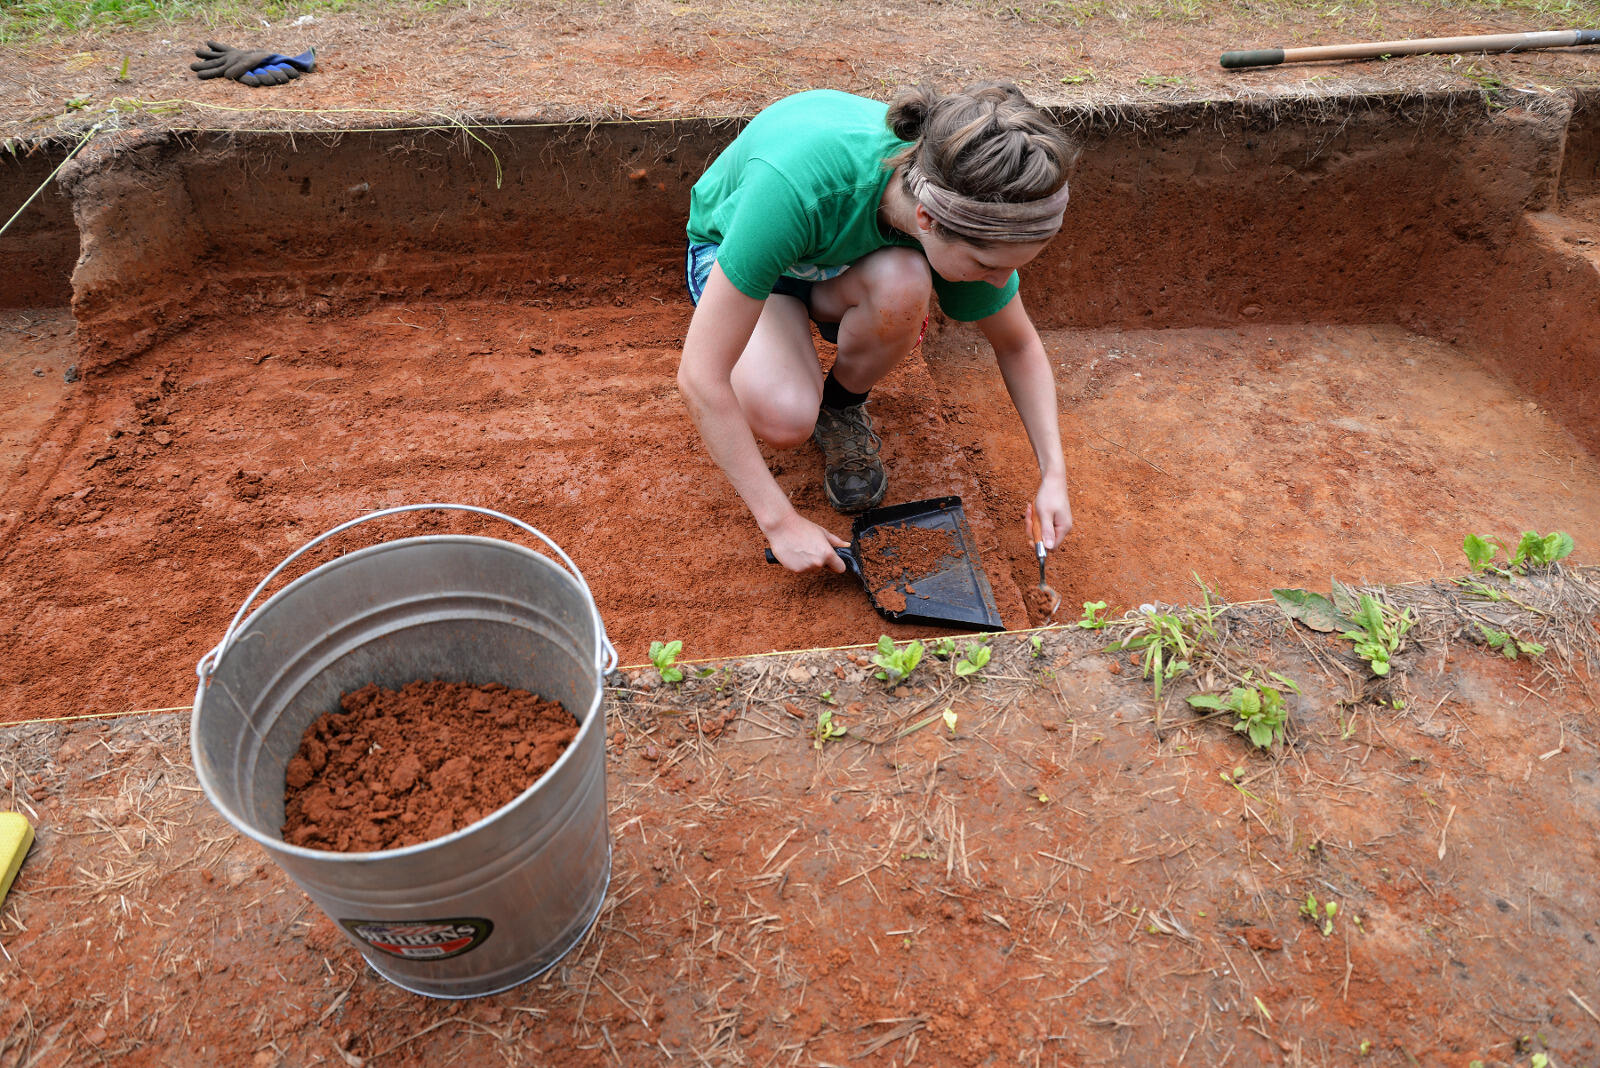 Zoe Rahsman, a VCU anthropology major who graduated in December, excavates a section of the property's field.